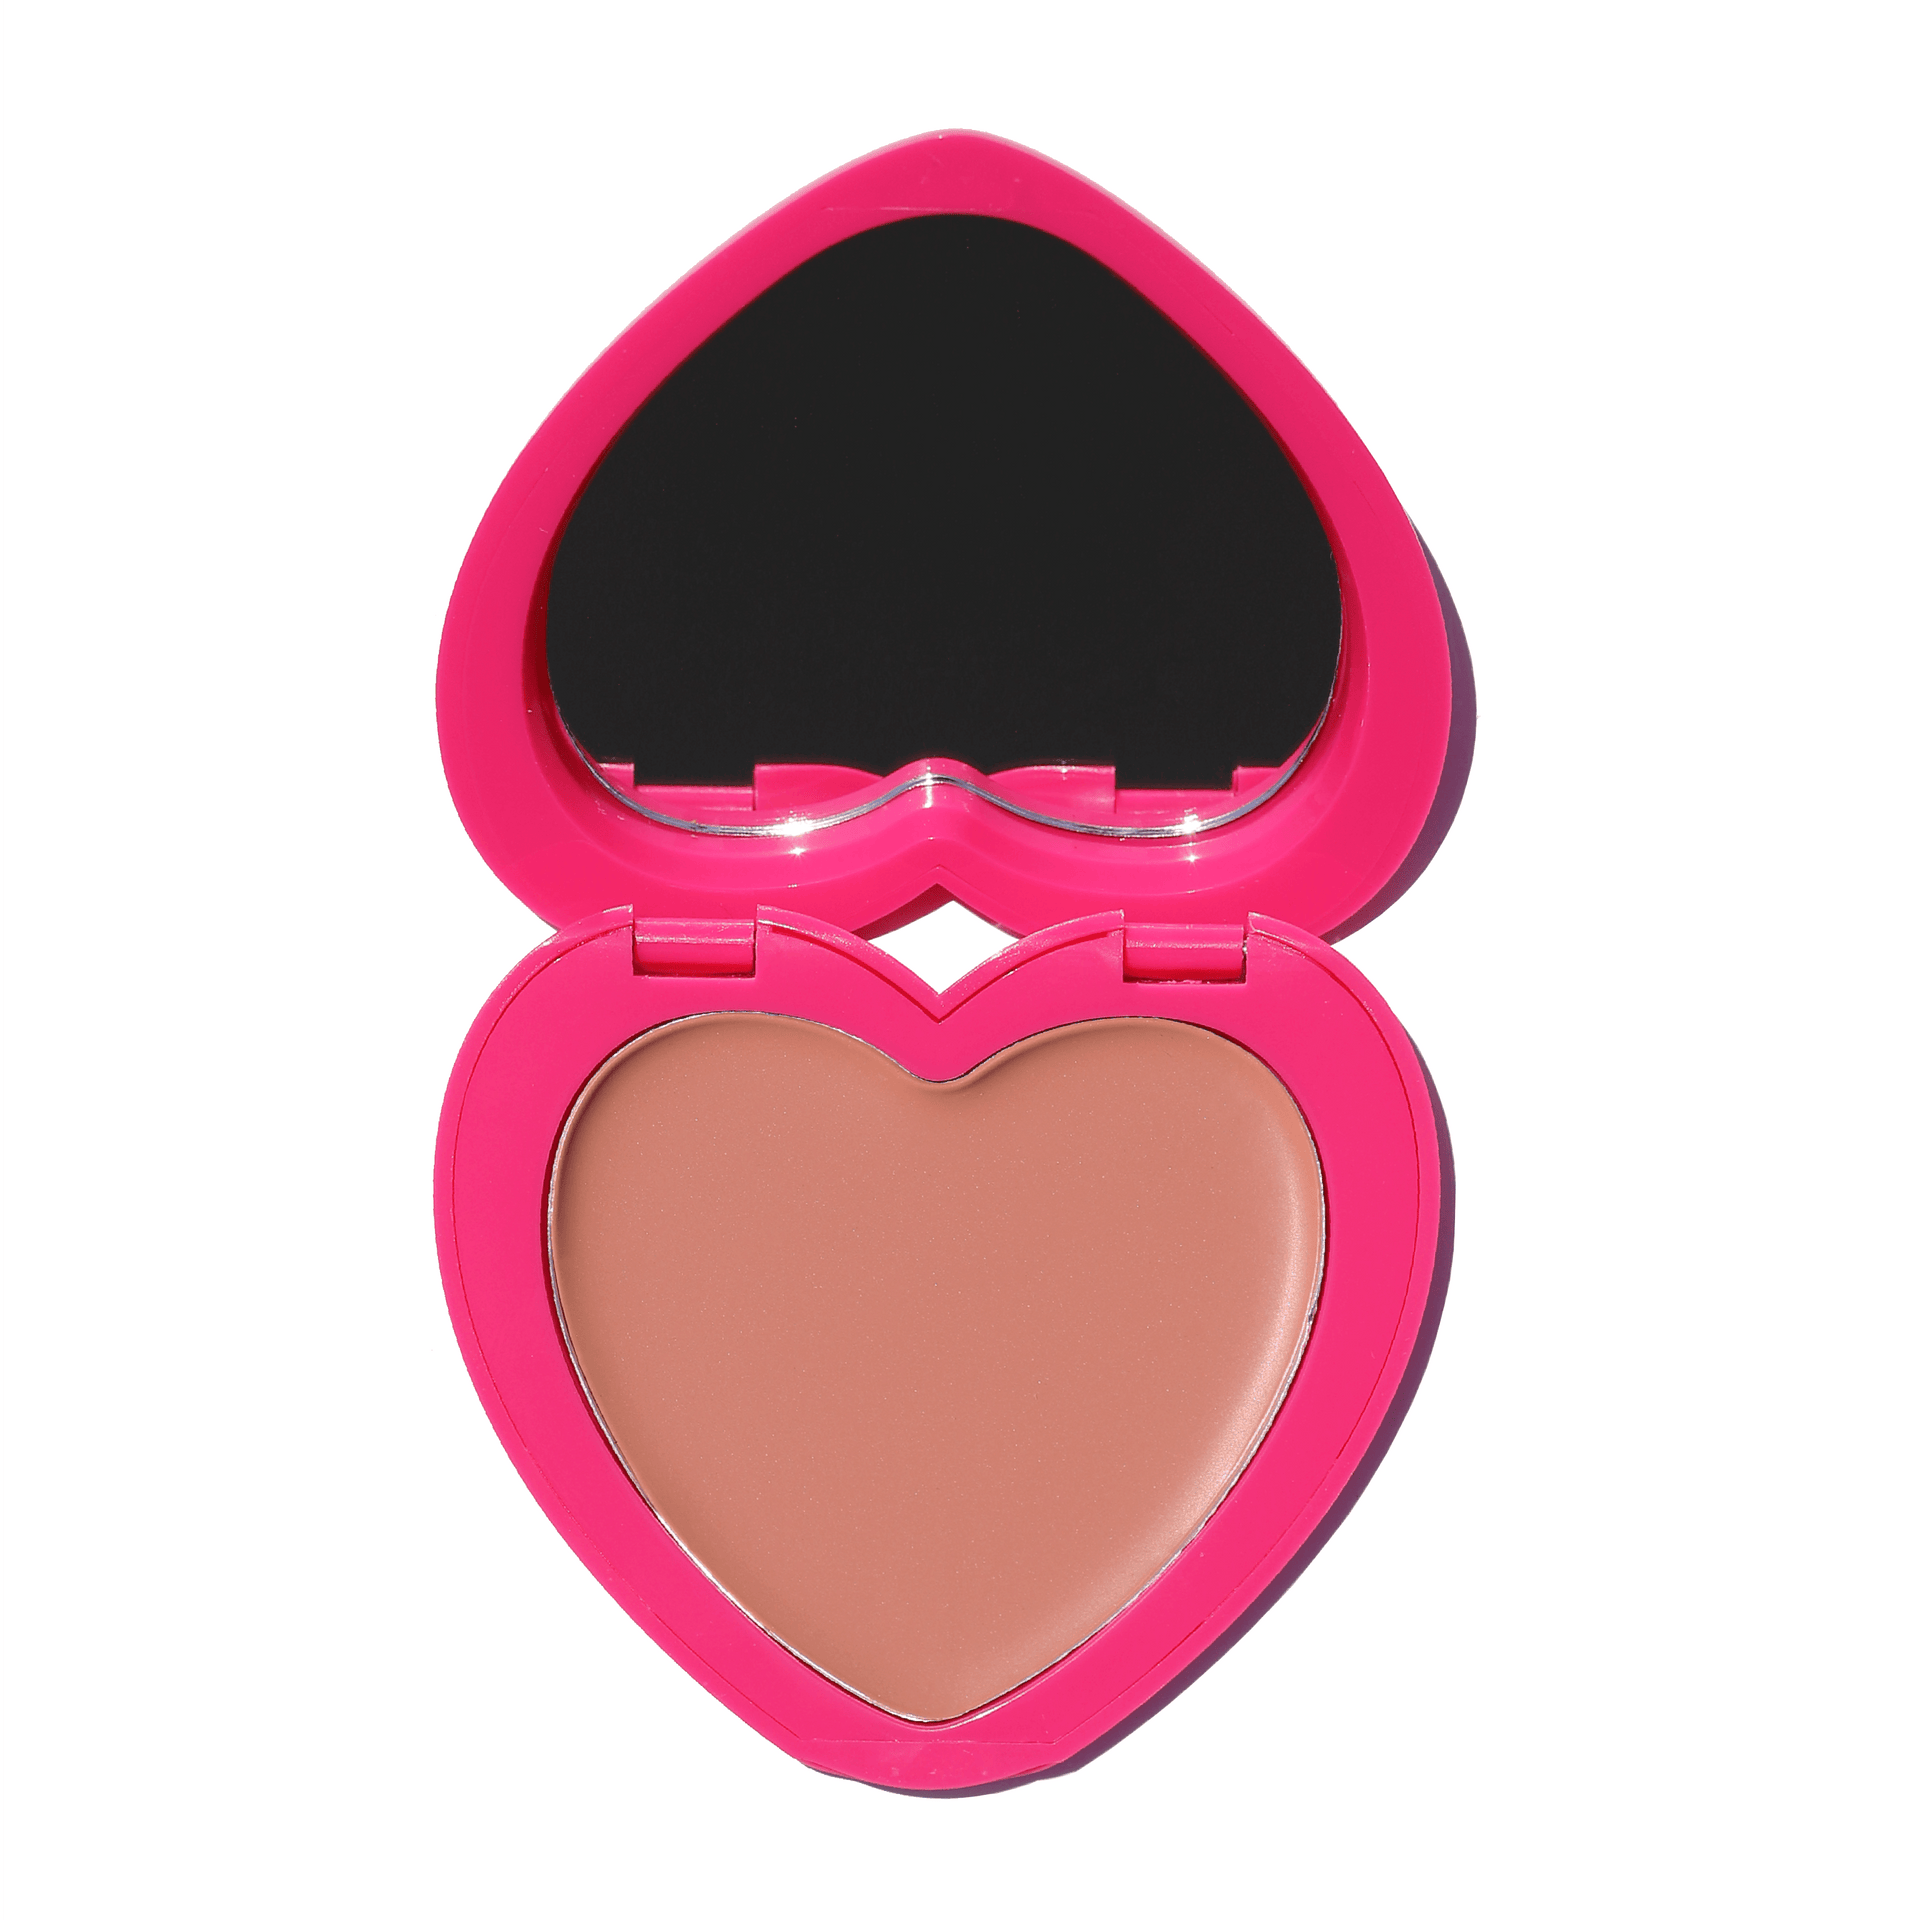 Heart-shaped compact of Candy Paint Cheek + Lip Tint in shade "Velvet Tiger" with a buildable cream blush inside and a built-in mirror on the lid.